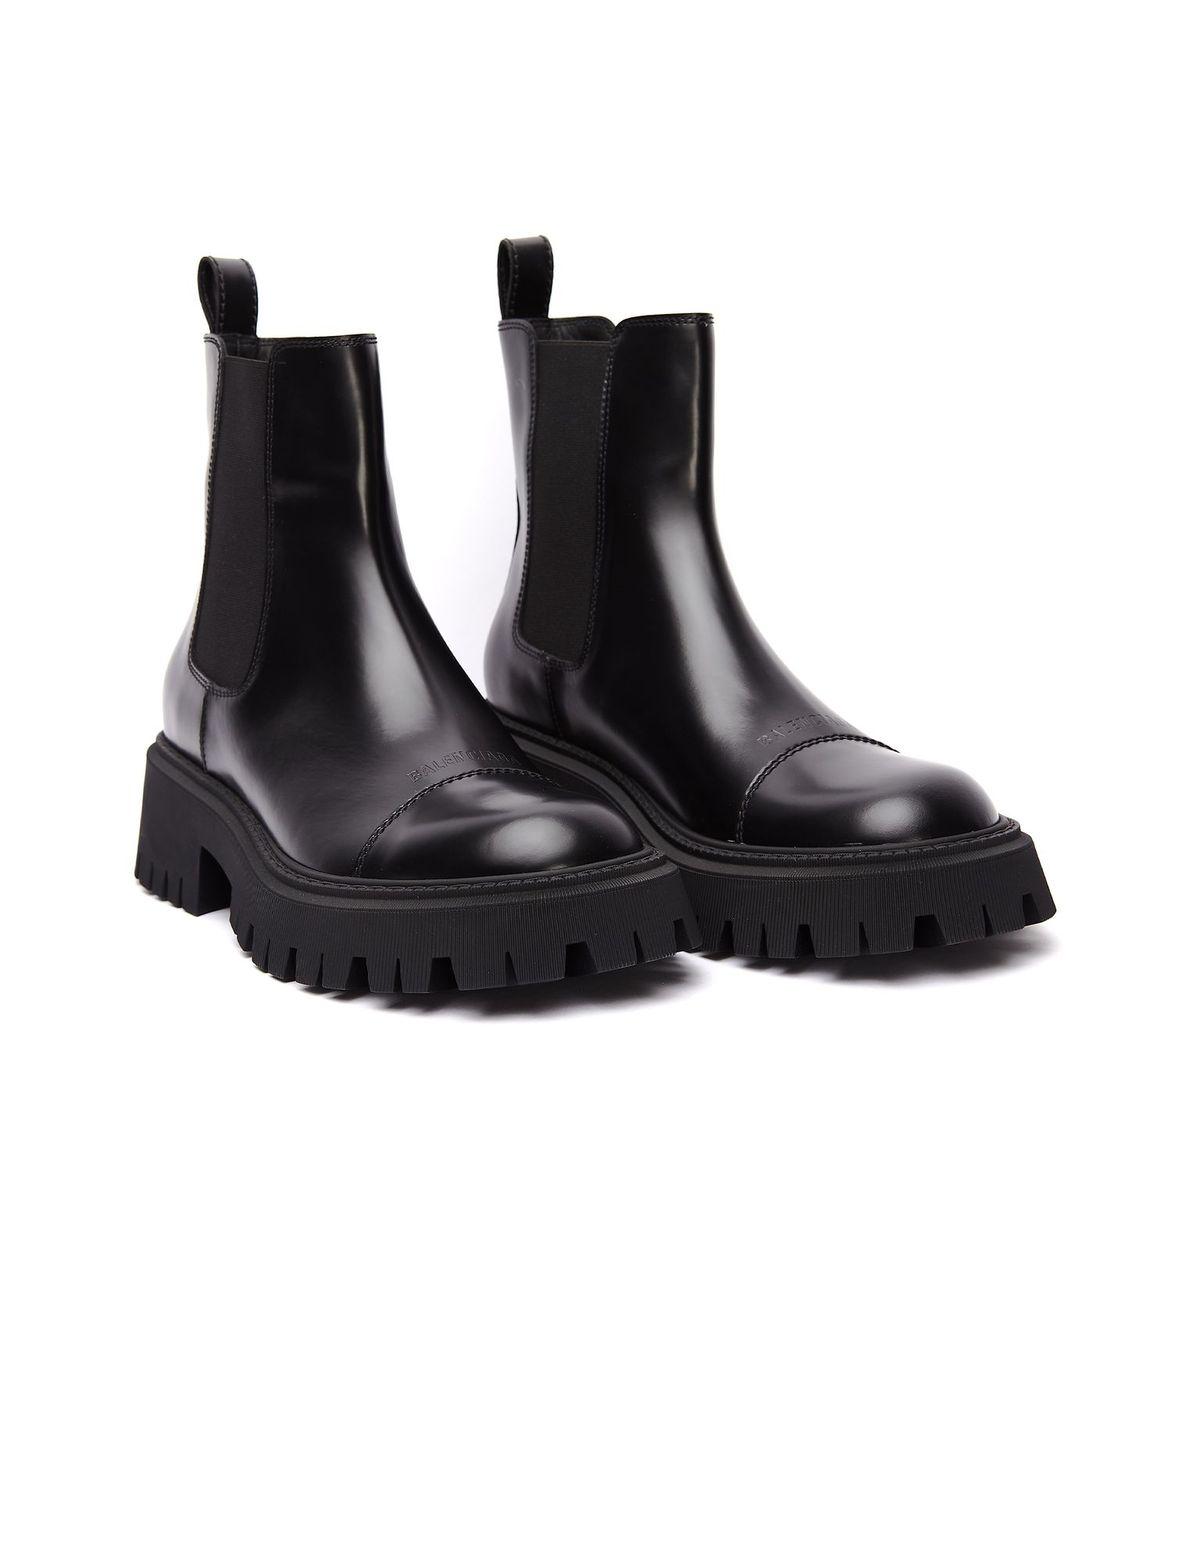 Balenciaga Leather Black Chelsea Boots for Men - Lyst